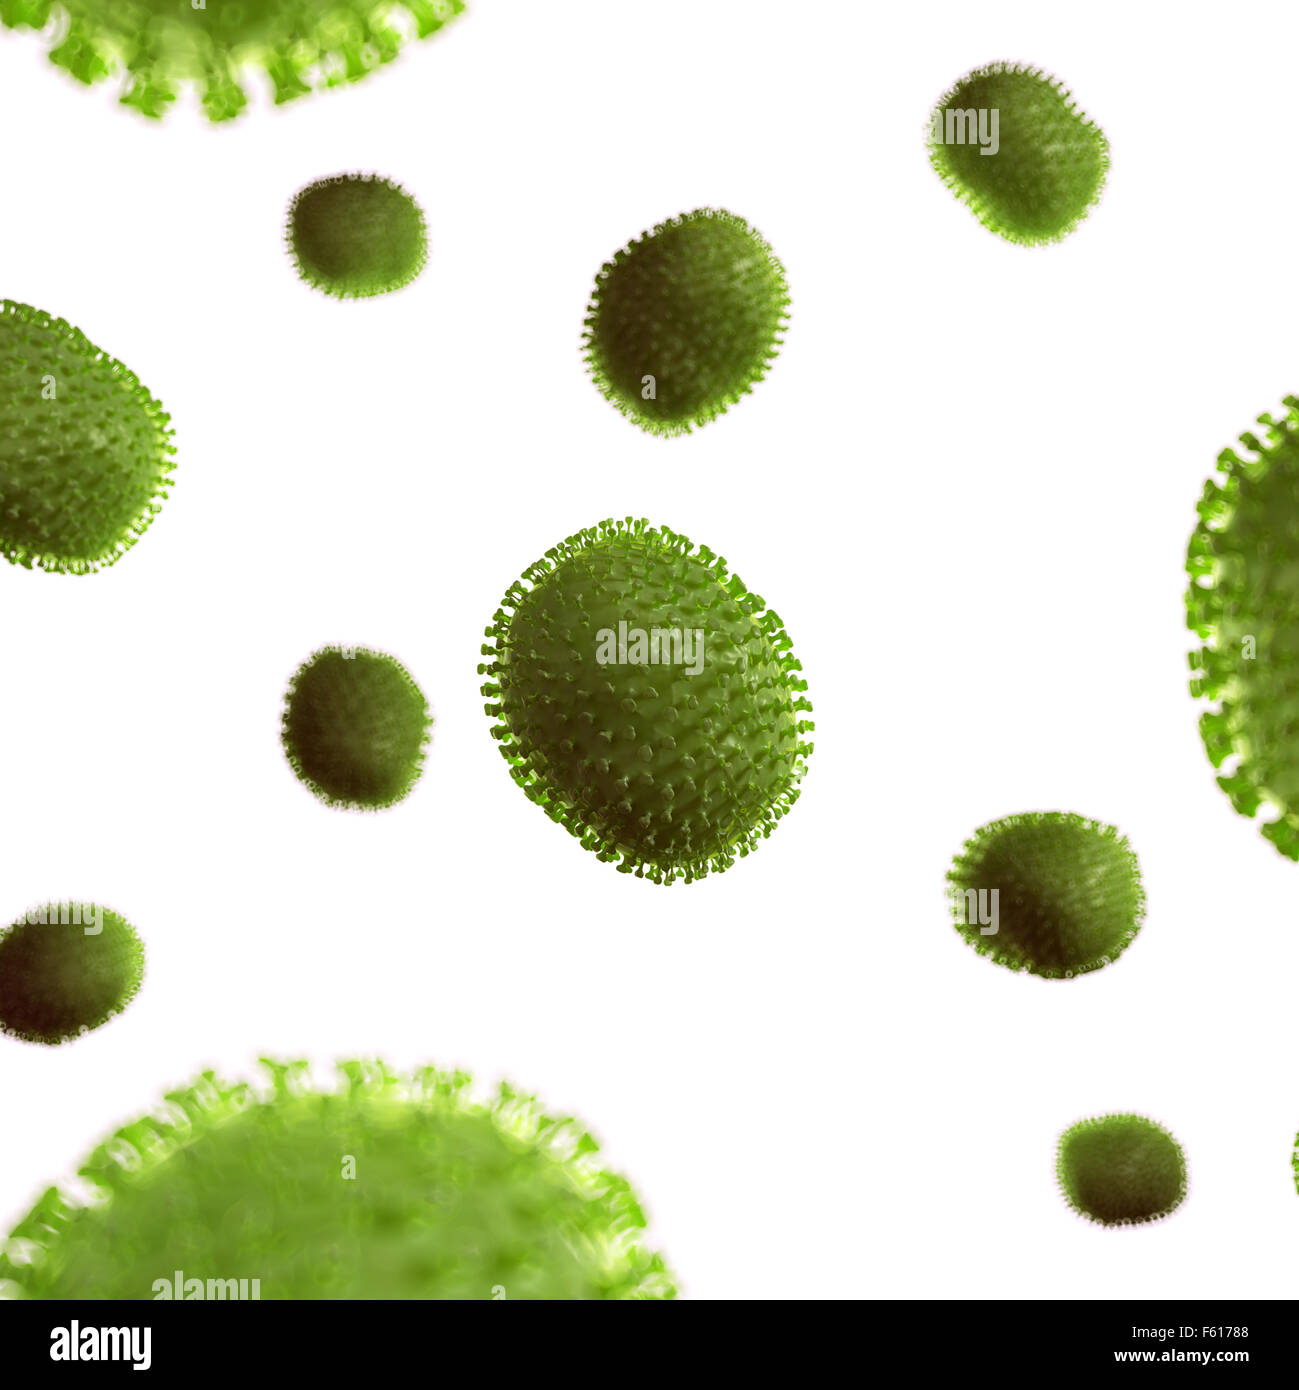 medically accurate illustration of some viruses Stock Photo